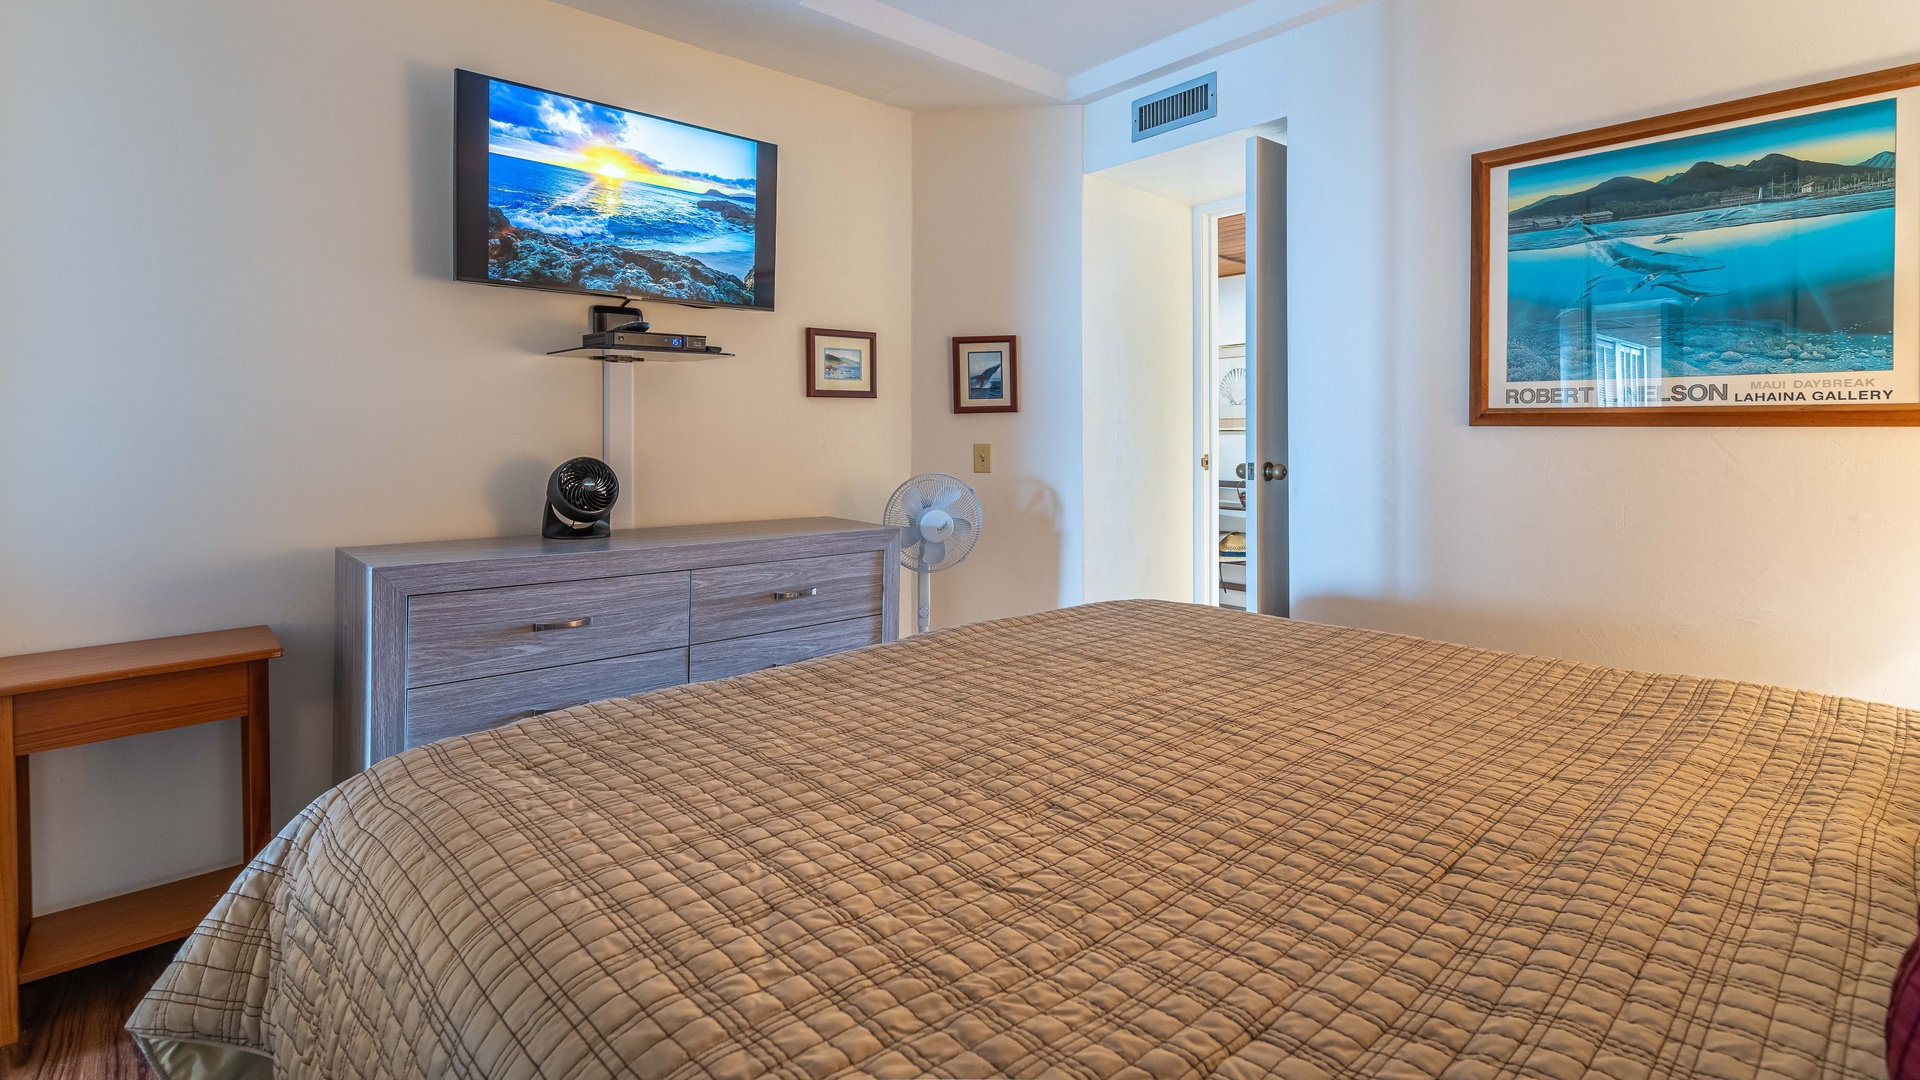 Waianae Vacation Rentals, Makaha - Hawaiian Princess - 305 - The guest bedroom with a dresser and TV.